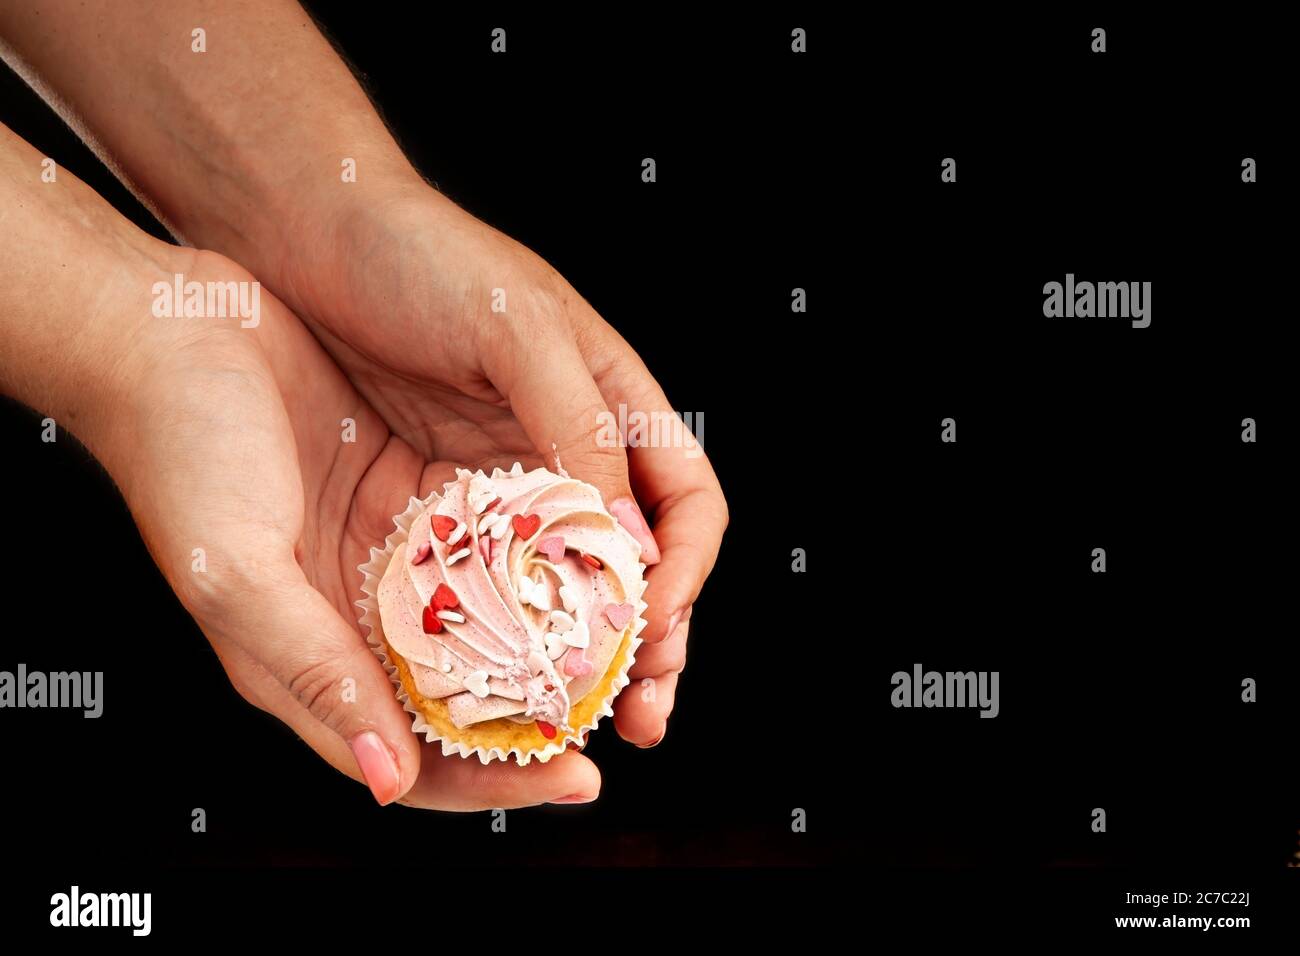 Female hands hold an appetizing, beautiful cupcake on a black background. Unhealthy, sweet food concept. Stock Photo